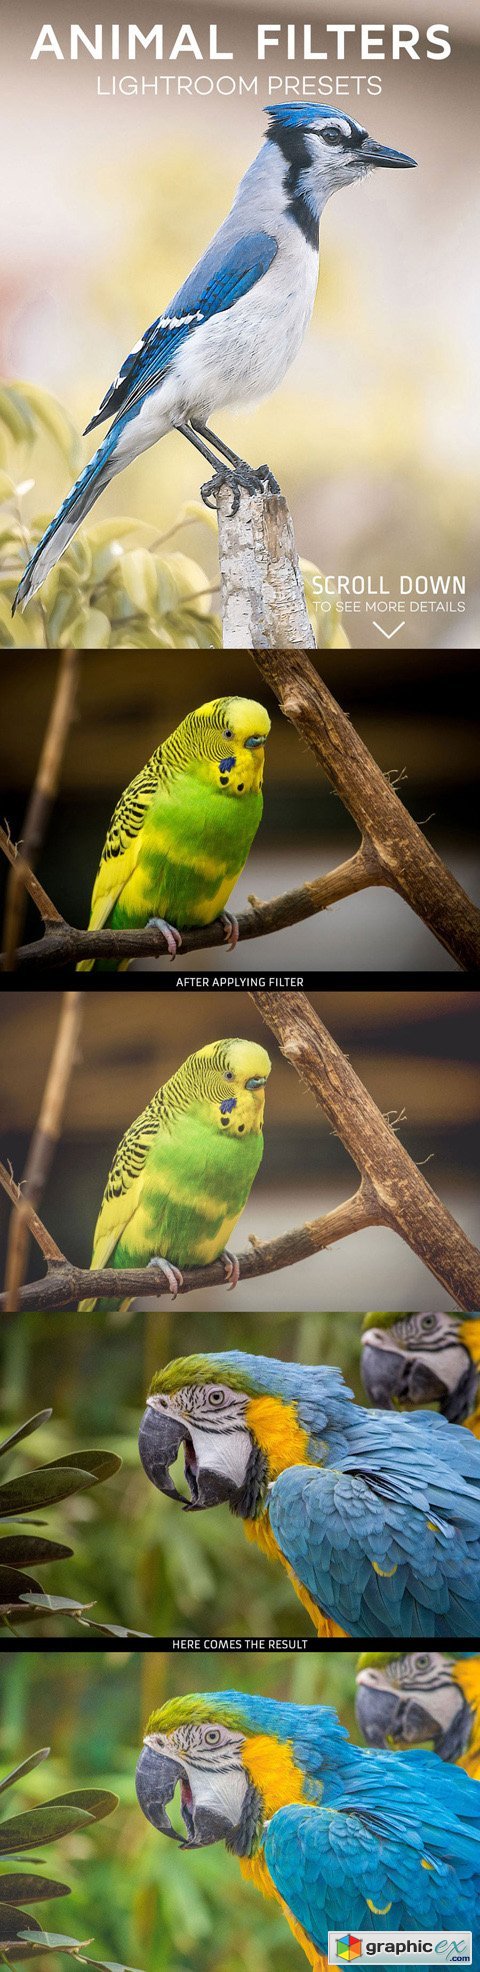 3 Animal Presets for Lightroom & Photoshop Camera Raw (+ Ps Actions)